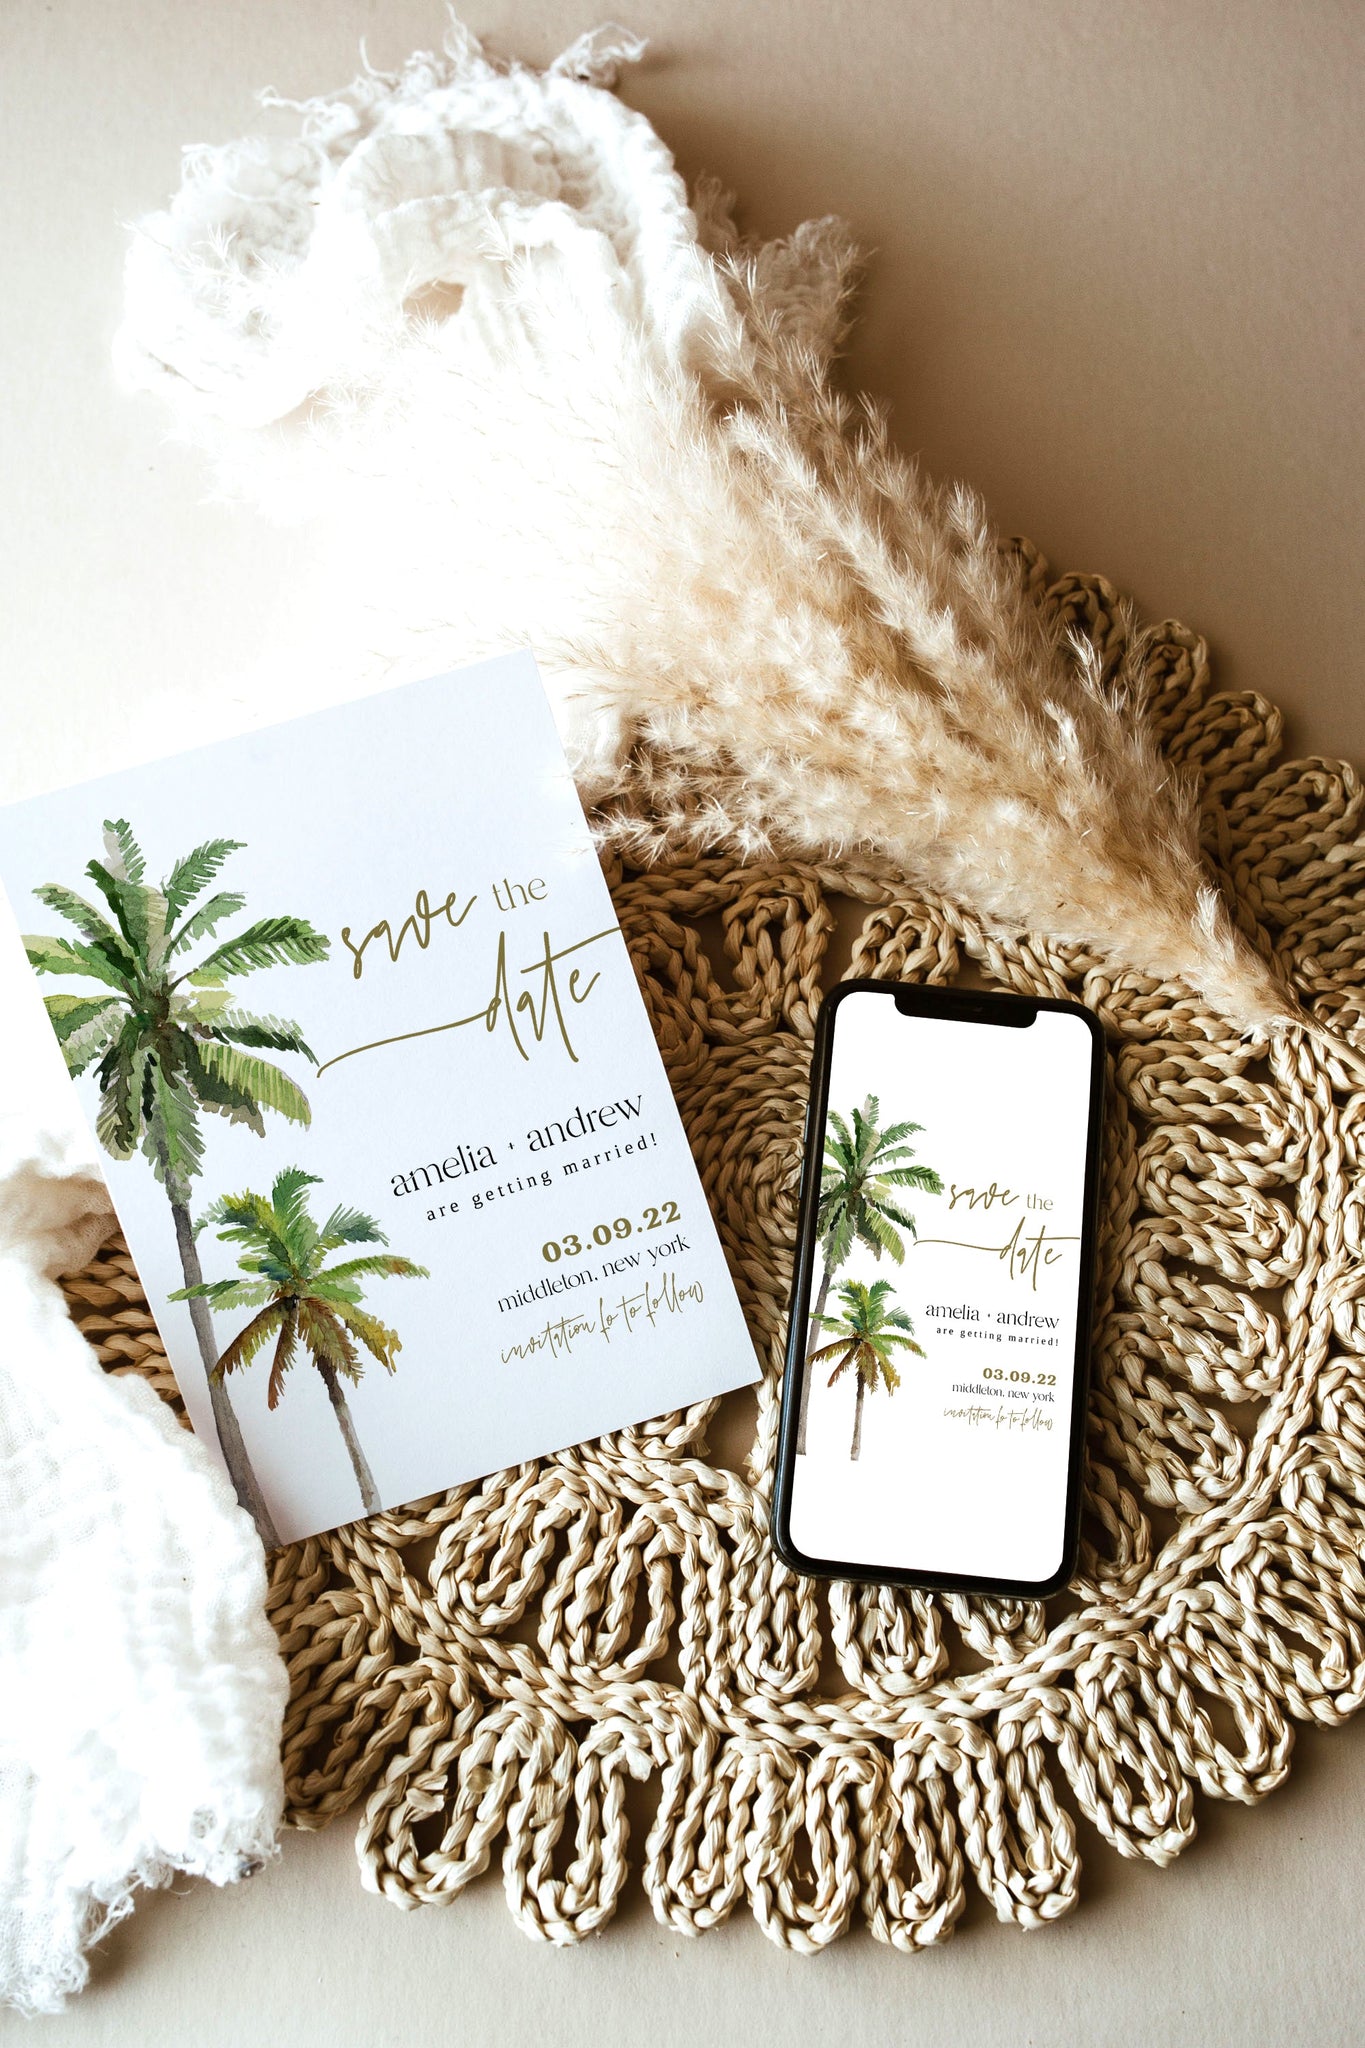 Tropical Save the Date Template, Minimalist Save the Date Template, Palm Tree Save the Date Template, Wedding Save the Date Card